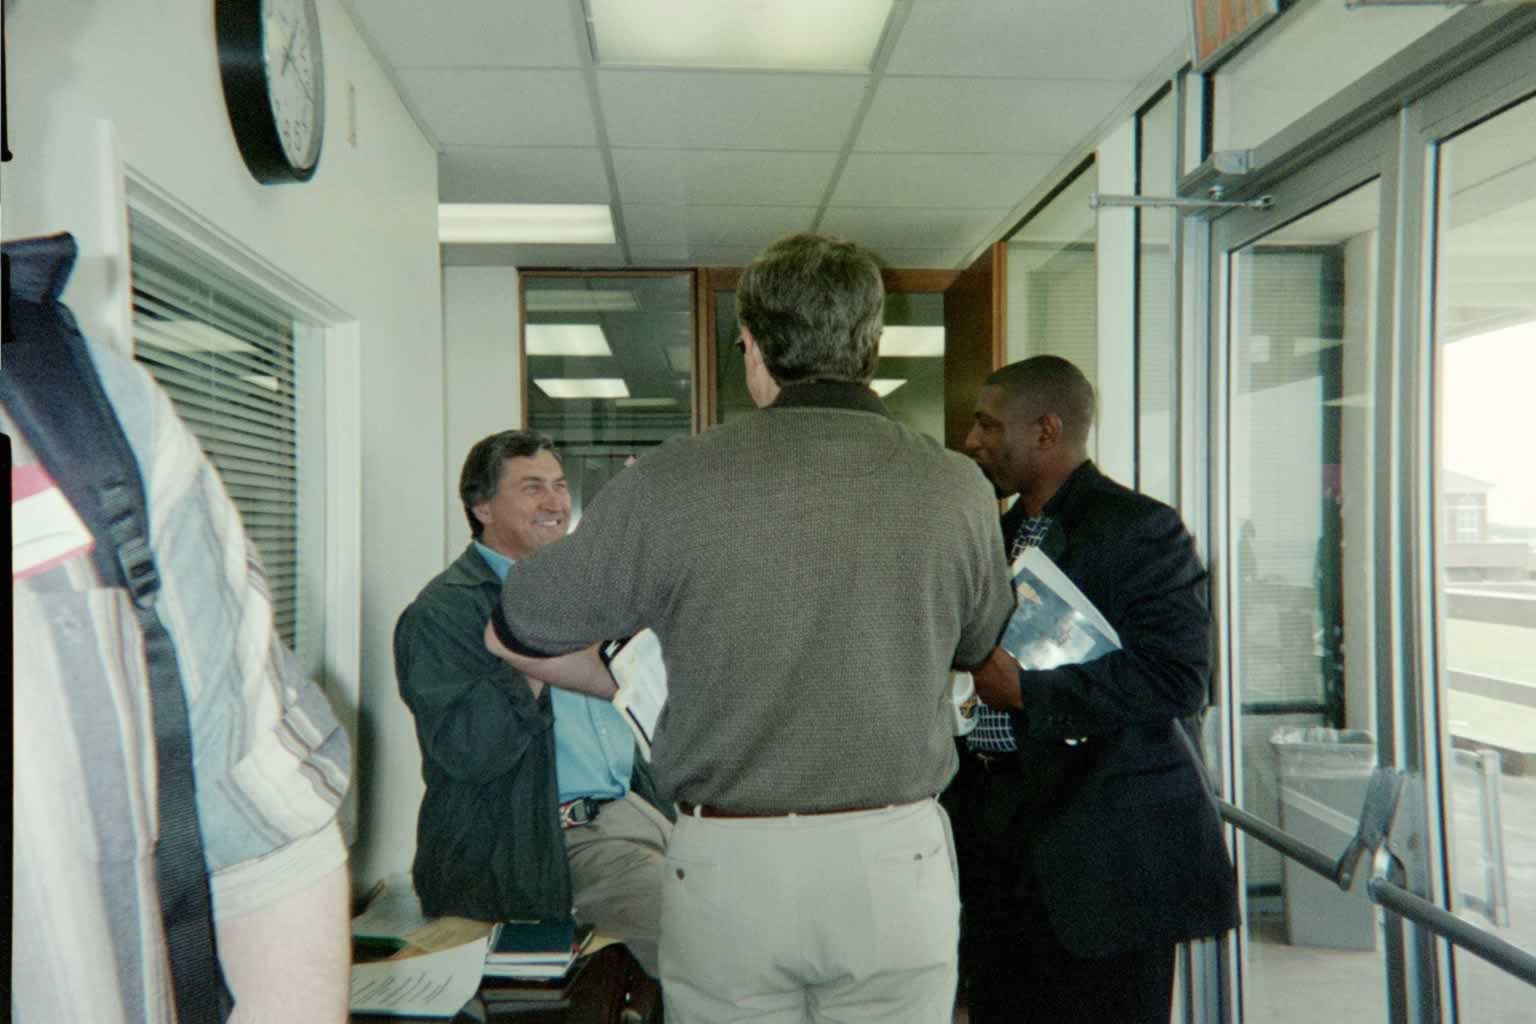 picture of Paul Marsahll standing and conversing with two other men